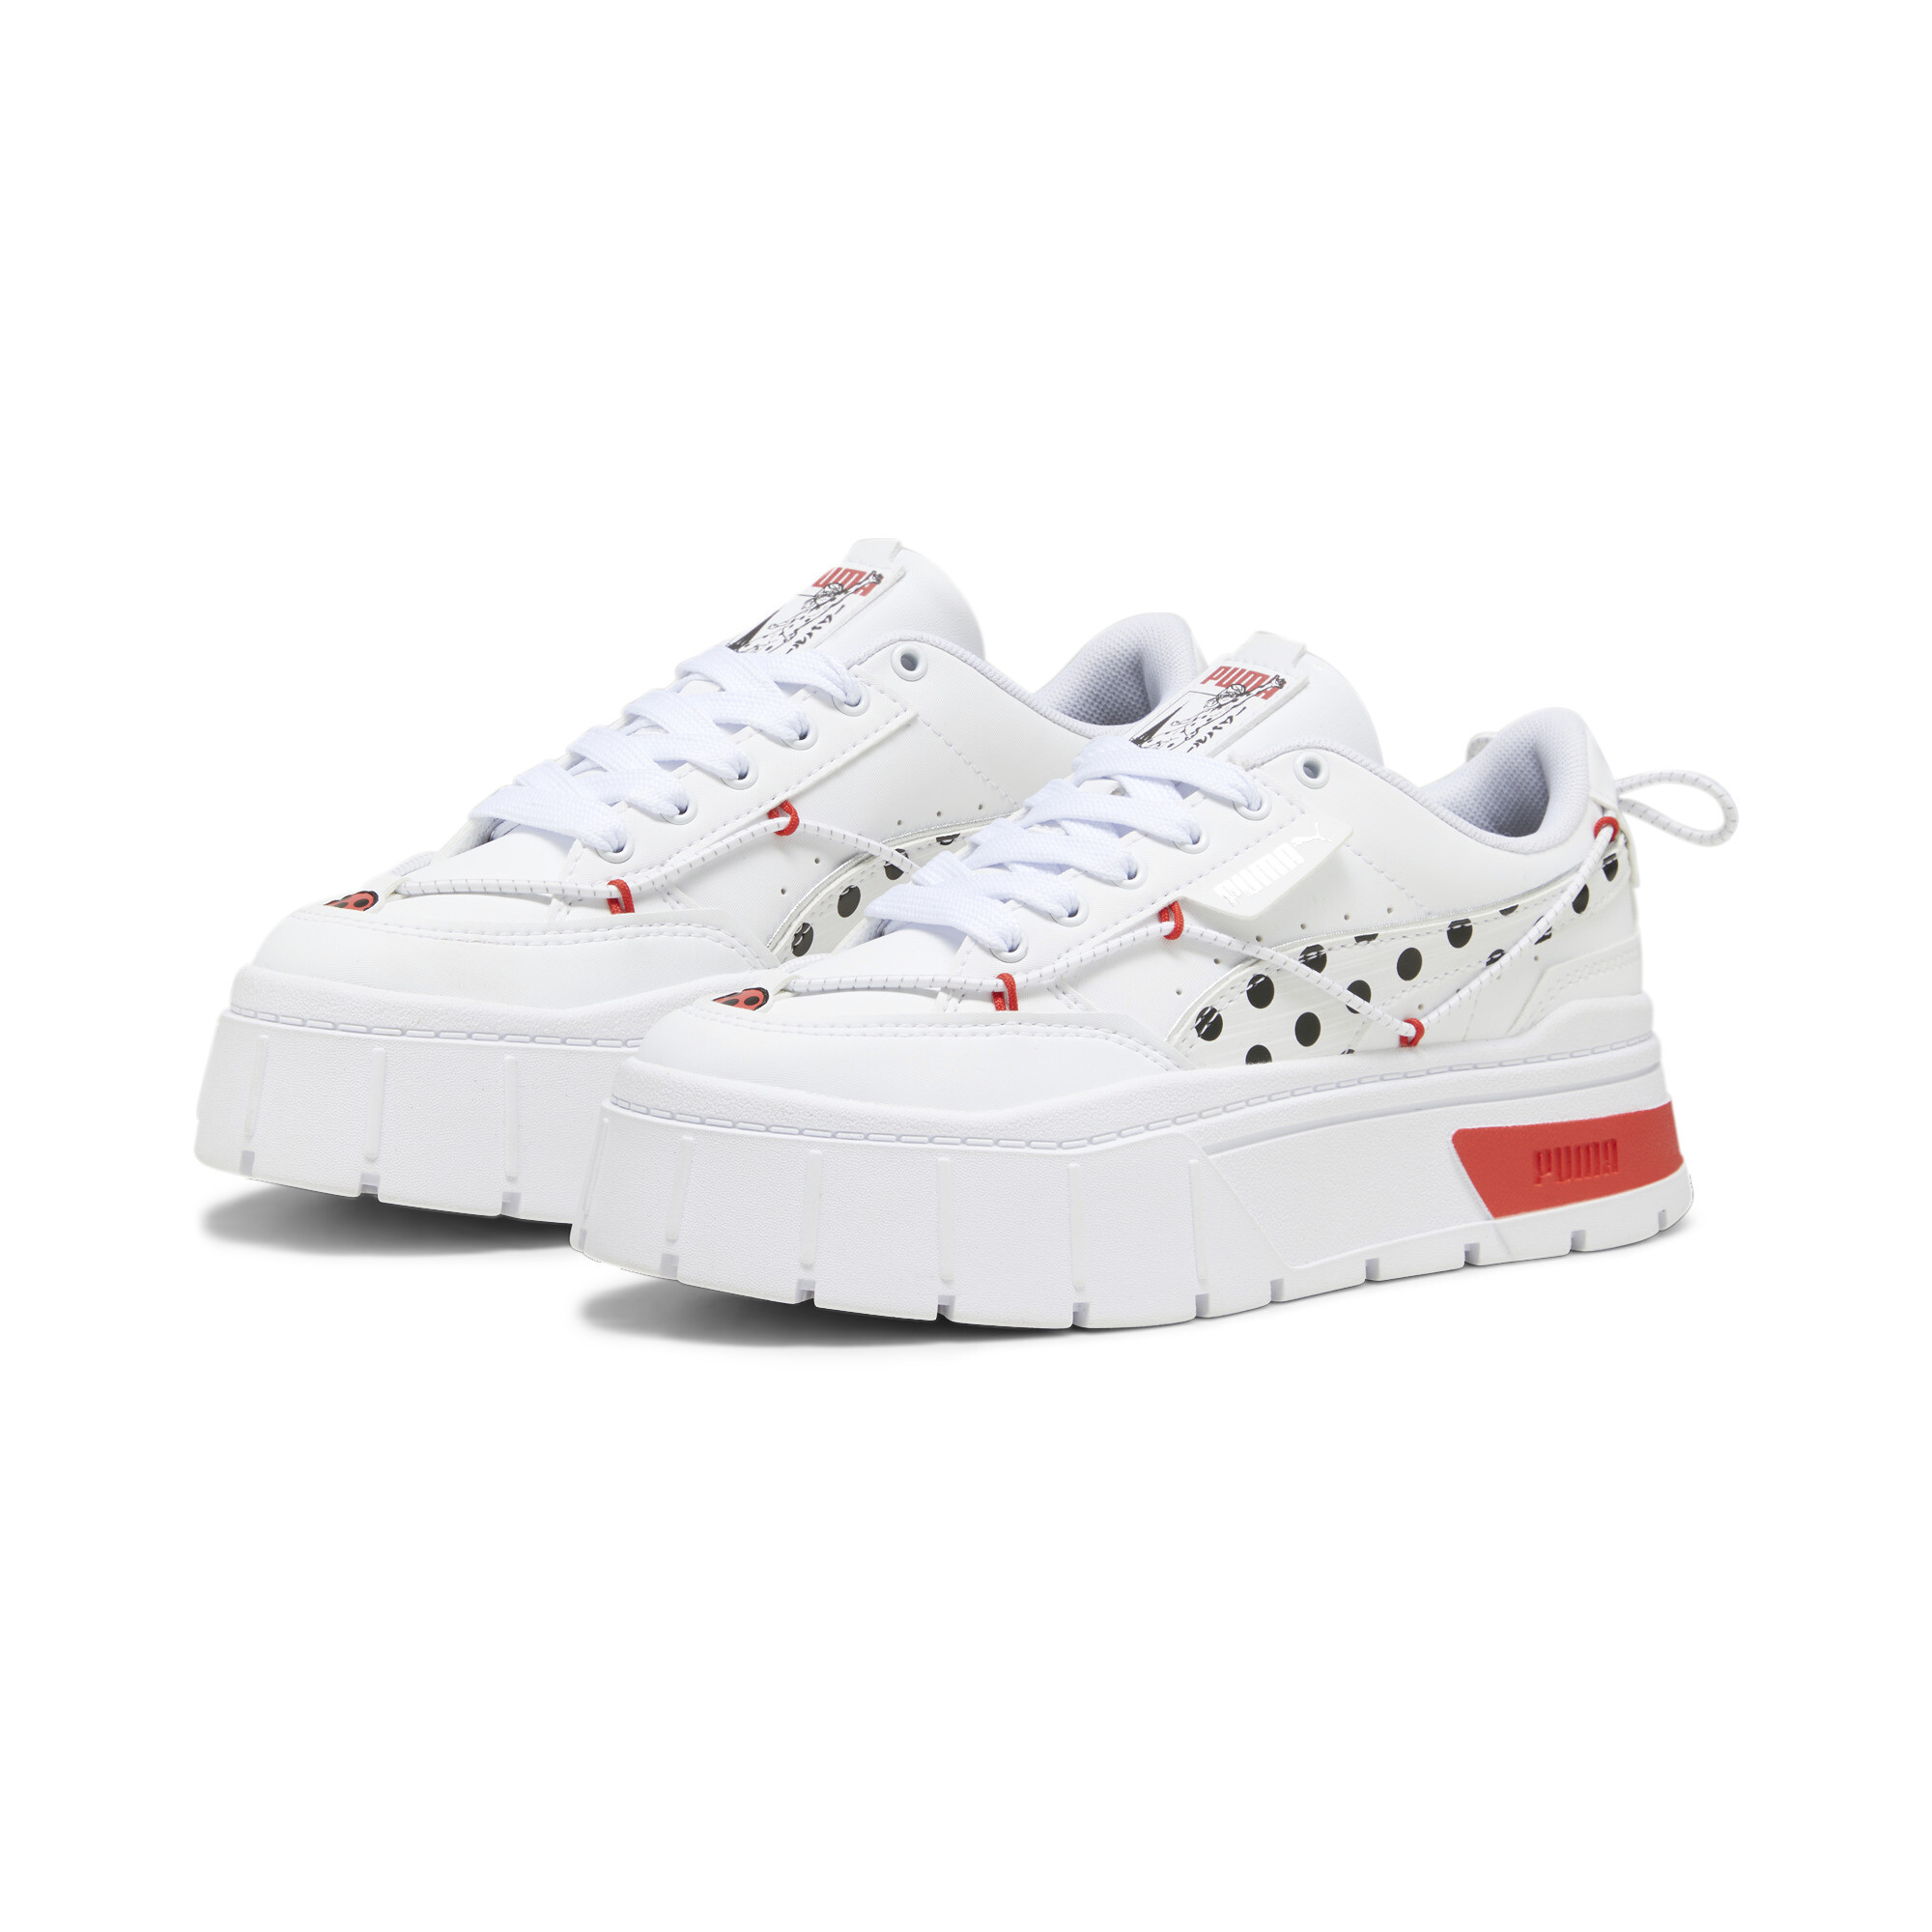 PUMA X MIRACULOUS Mayze Stack Youth Sneakers In White, Size EU 37.5